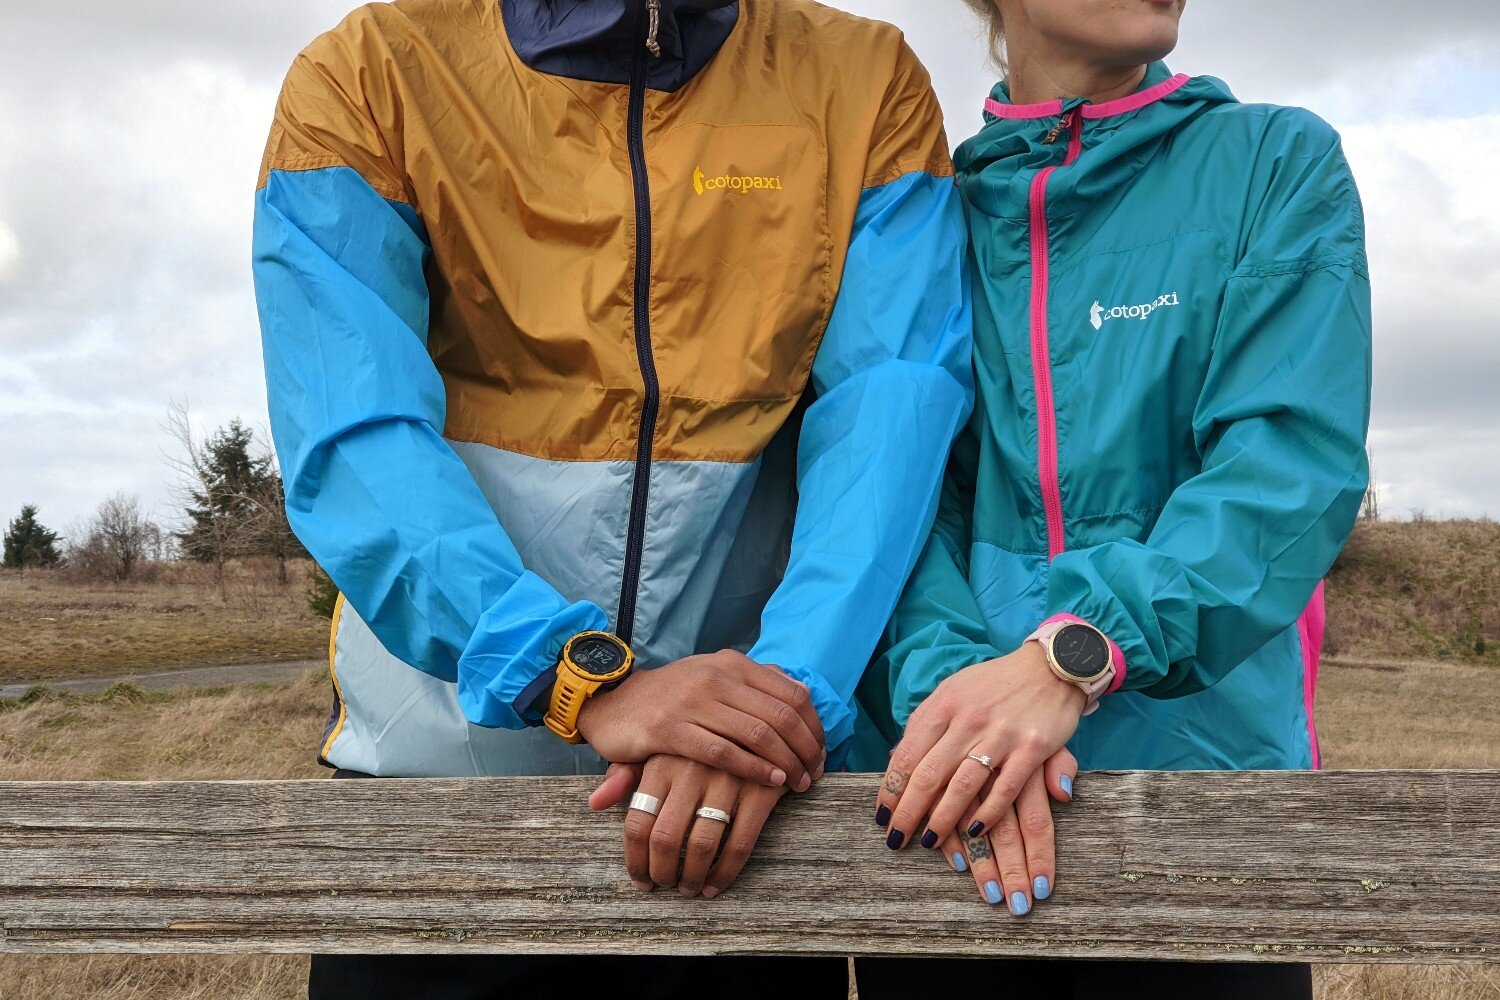 The Cotopaxi Teca is an affordable windbreaker with great color options